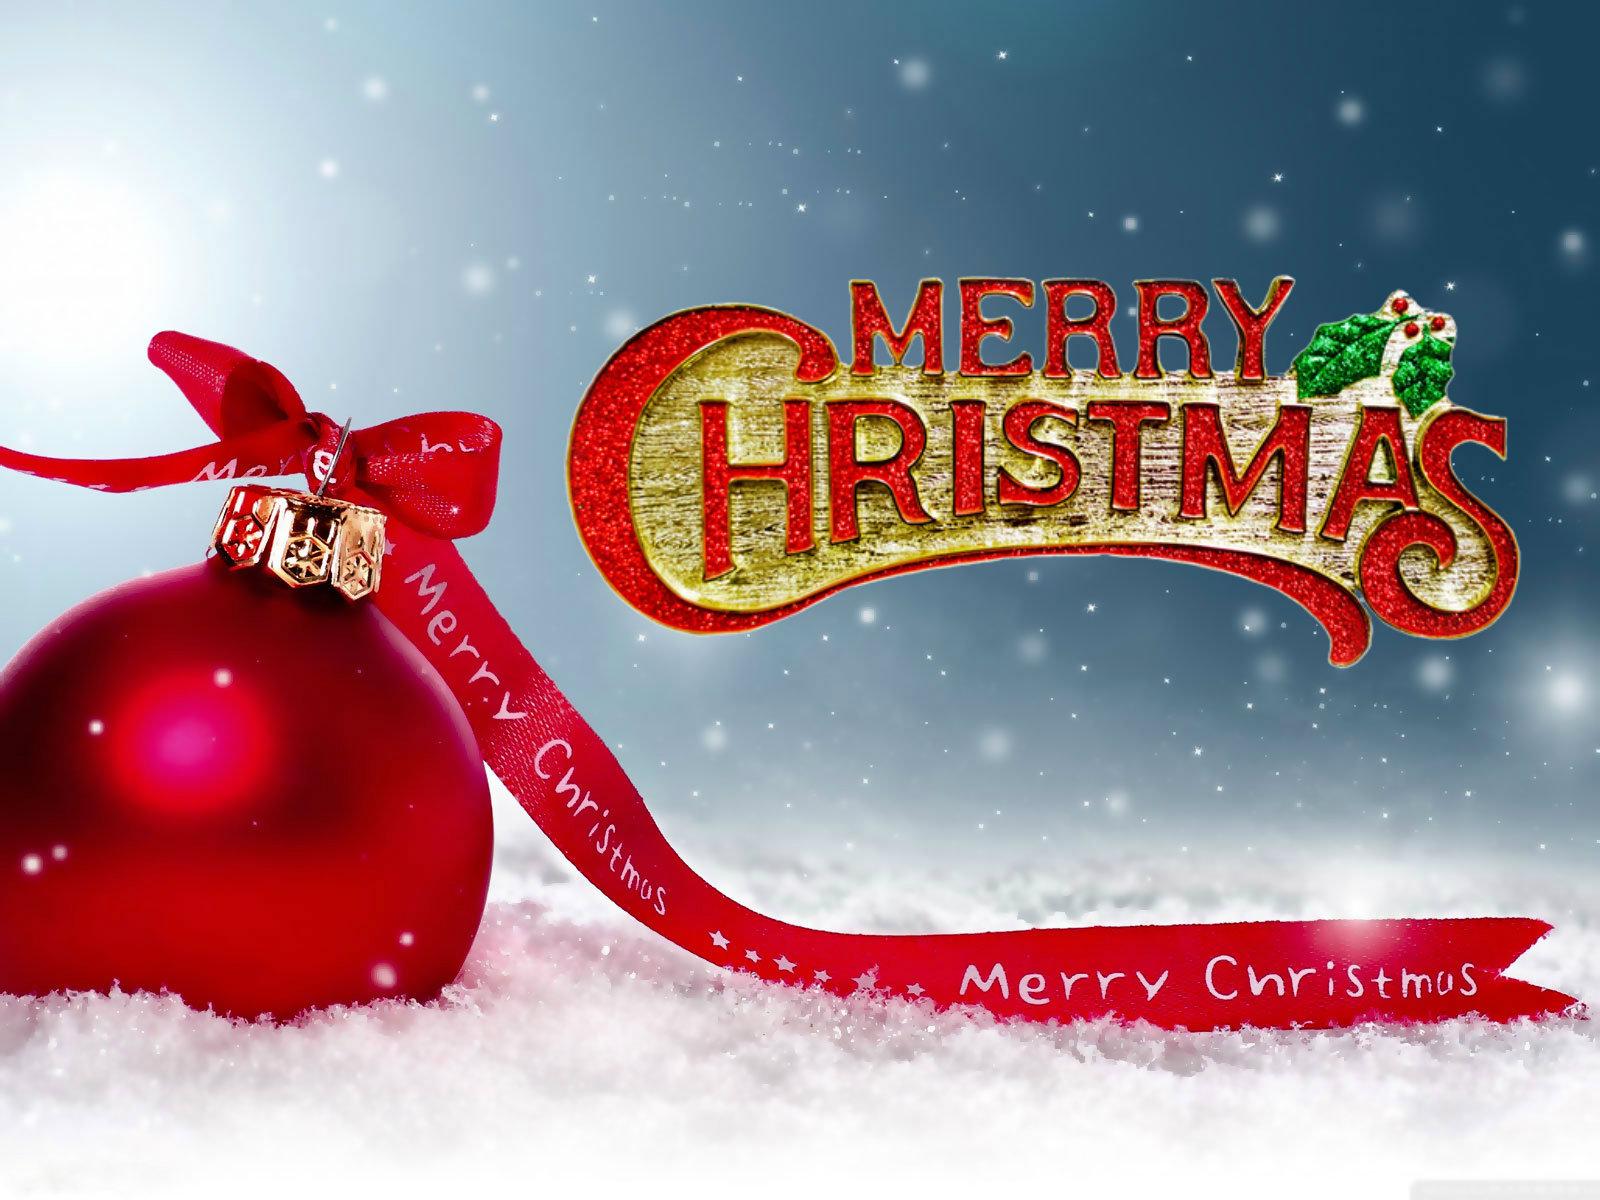 ▷Merry Christmas 2020 Image. HD【Wallpaper Picture Wishes